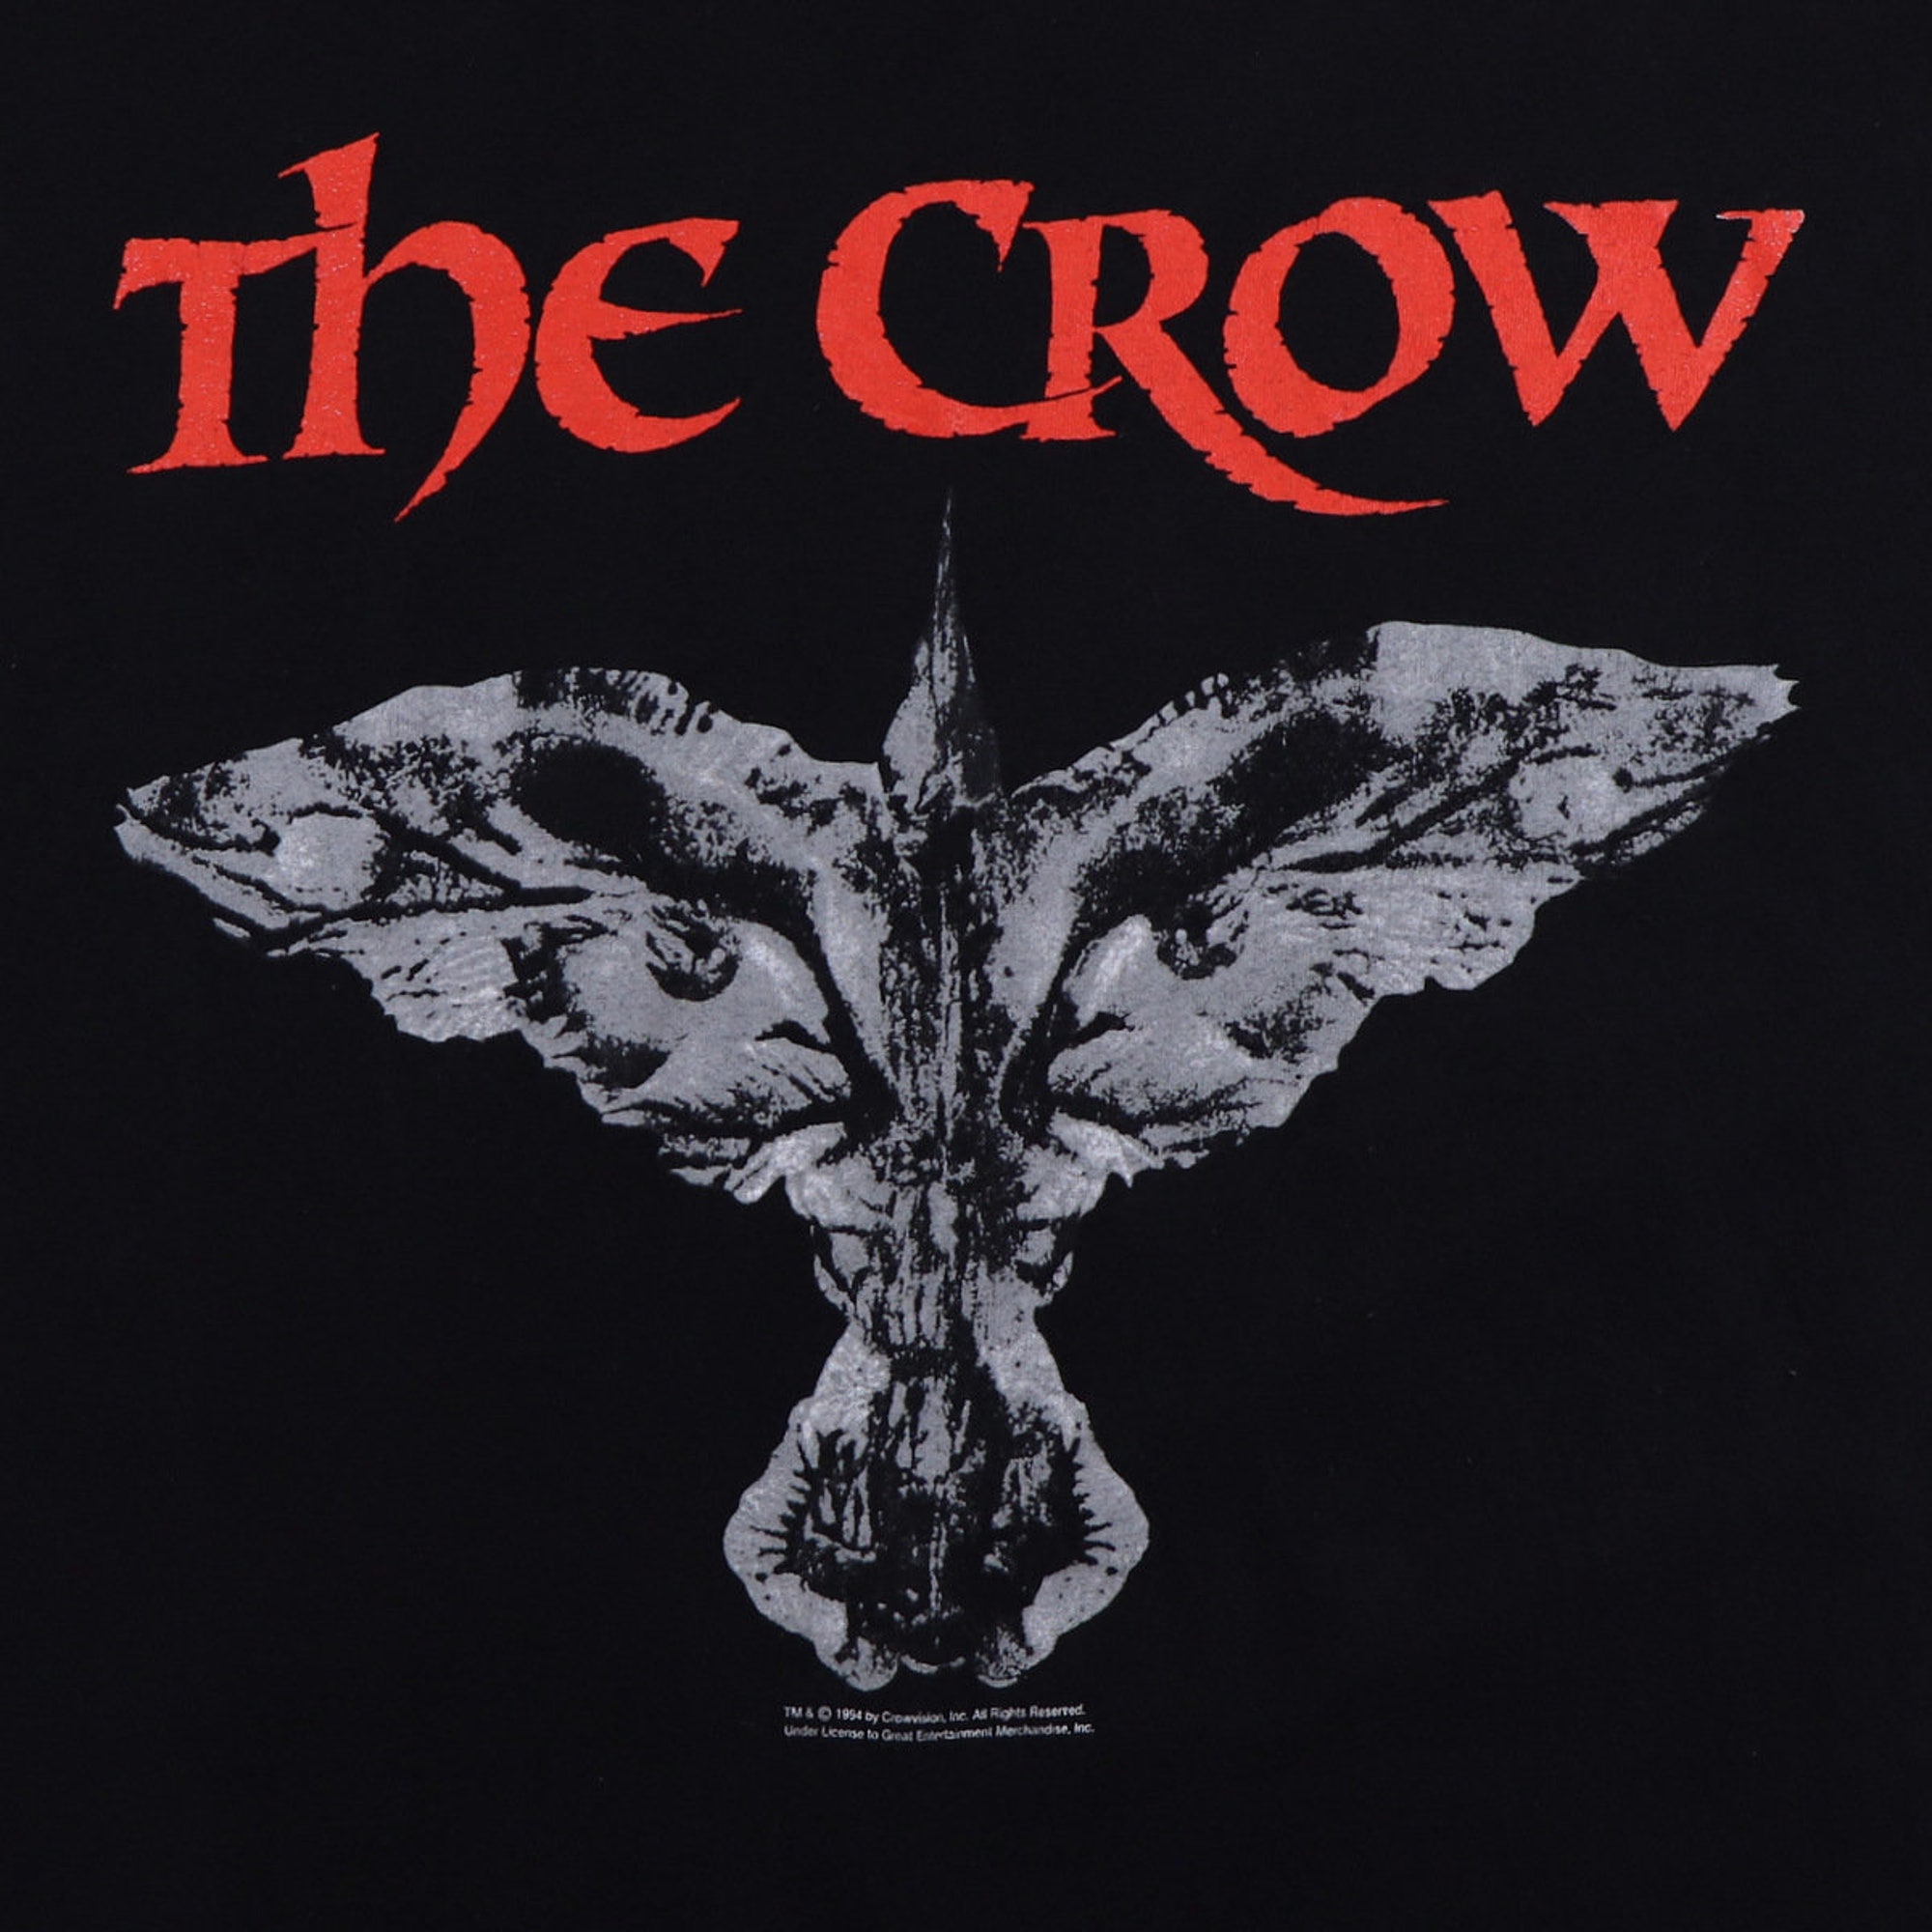 vintage 1994 The Crow Believe In Angels Shirt